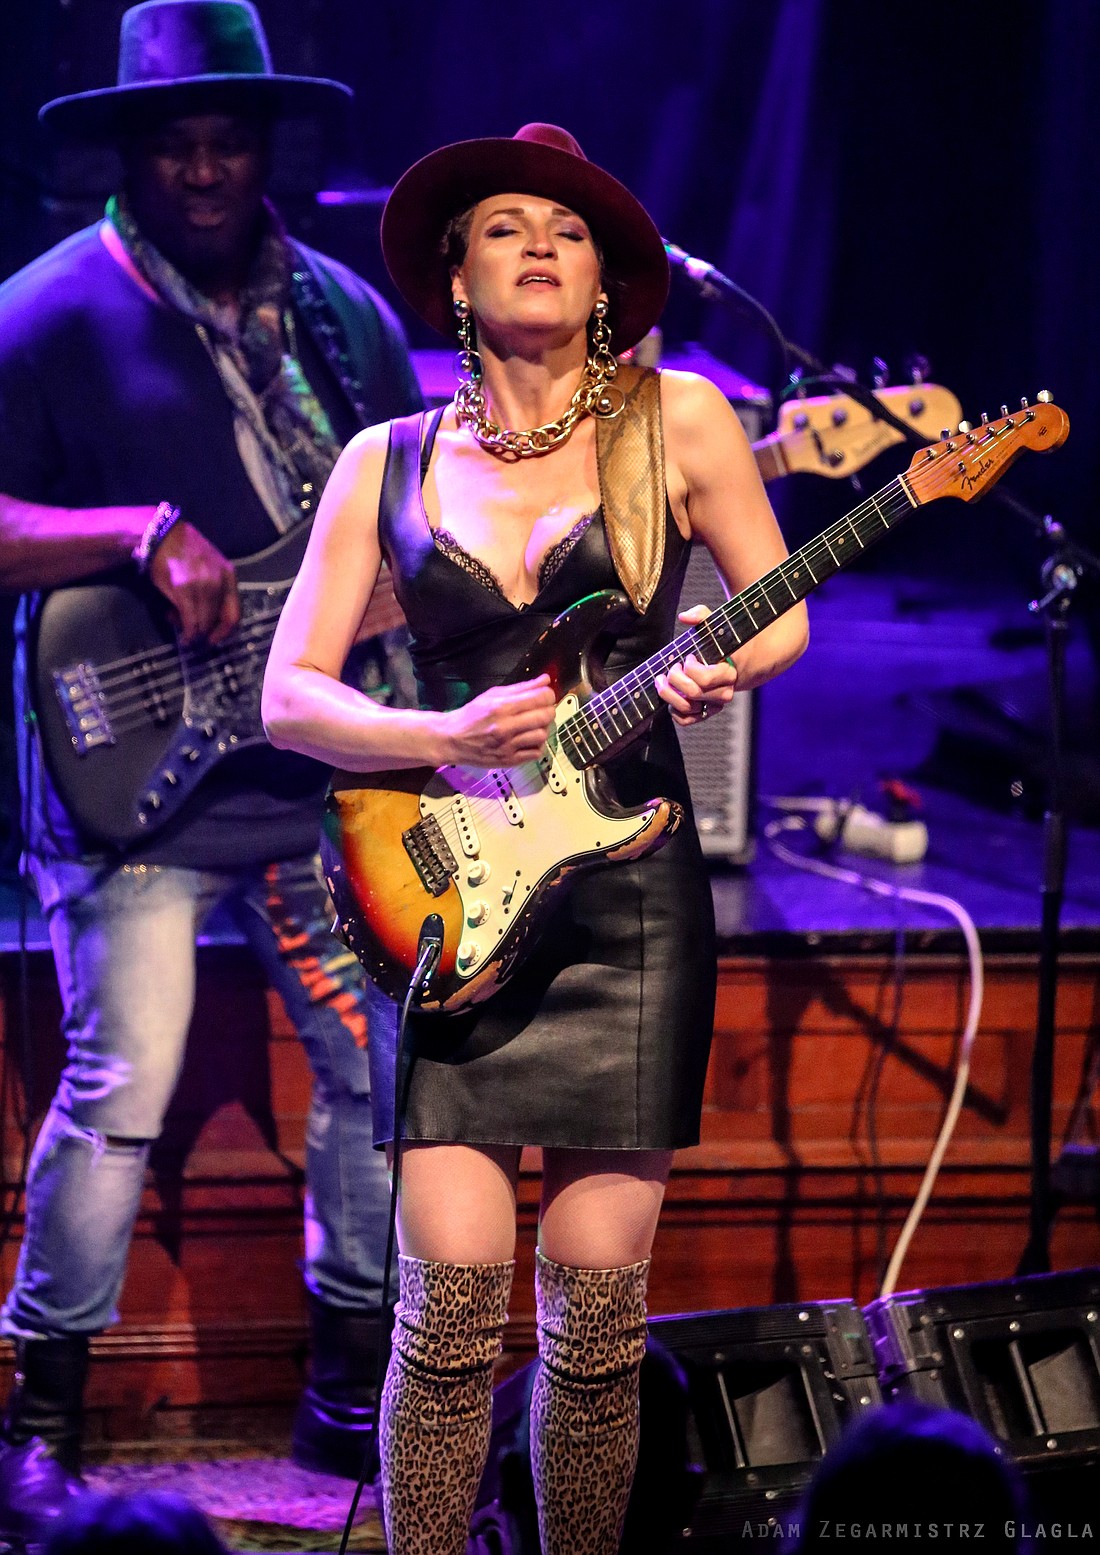 Award-winning guitar player, singer and songwriter Ana Popovic joins the lineup for the 25th annual Mt. Baker Rhythm & Blues Festival taking place July 28–31 at the Deming Logging Show grounds.